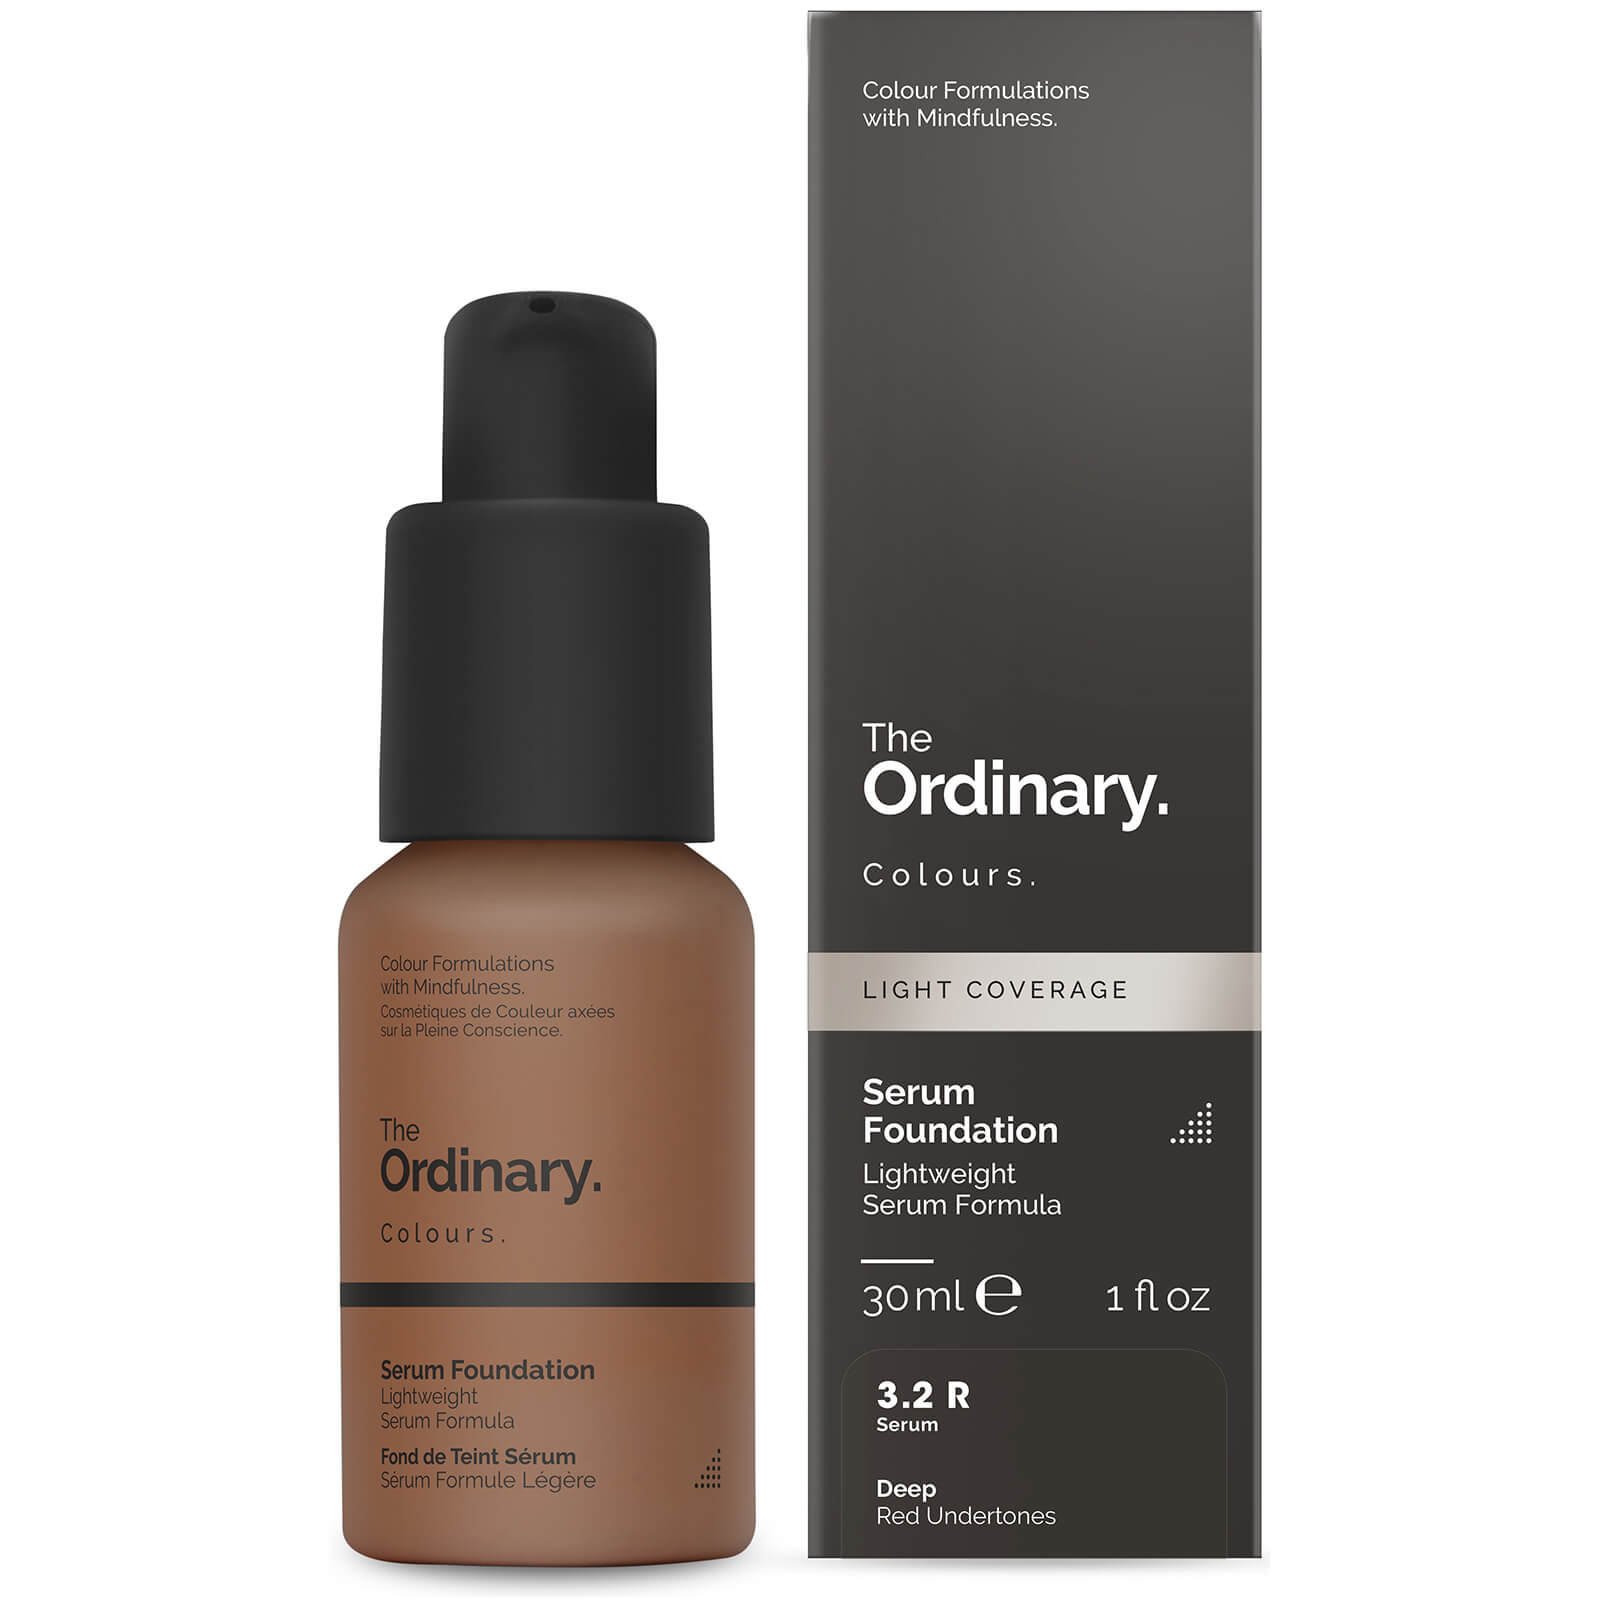 The Ordinary Serum Foundation with SPF 15 by The Ordinary Colours 30ml (Various Shades) - 3.2R